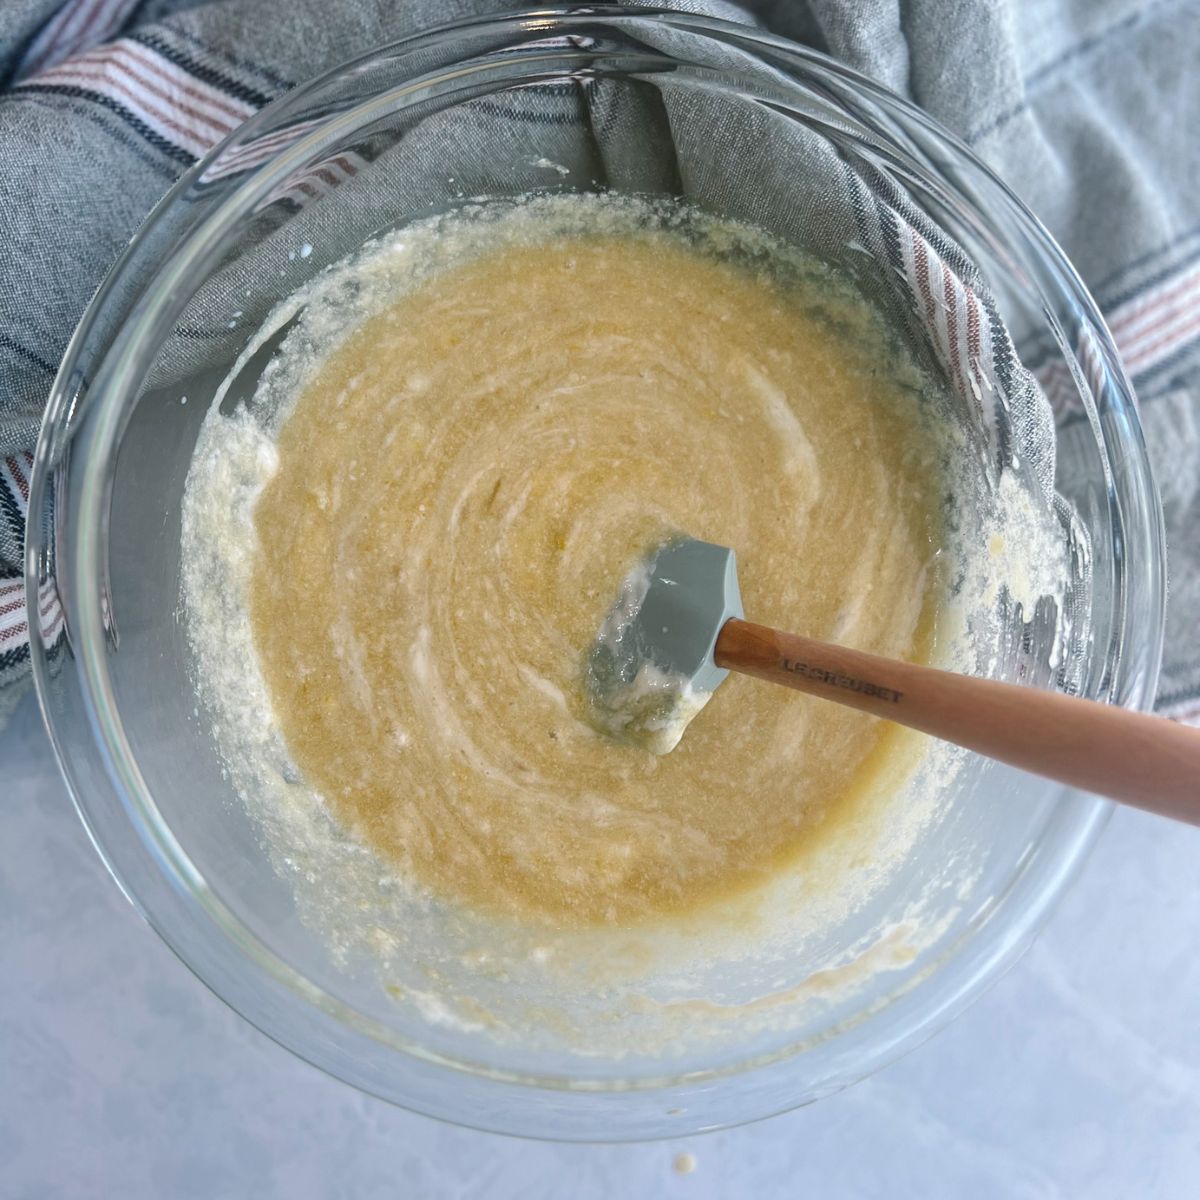 Glass mixing bowl with a rubber spatula and the buttermilk, egg, vanilla extract, and sourdough discard has been added to the muffin batter.